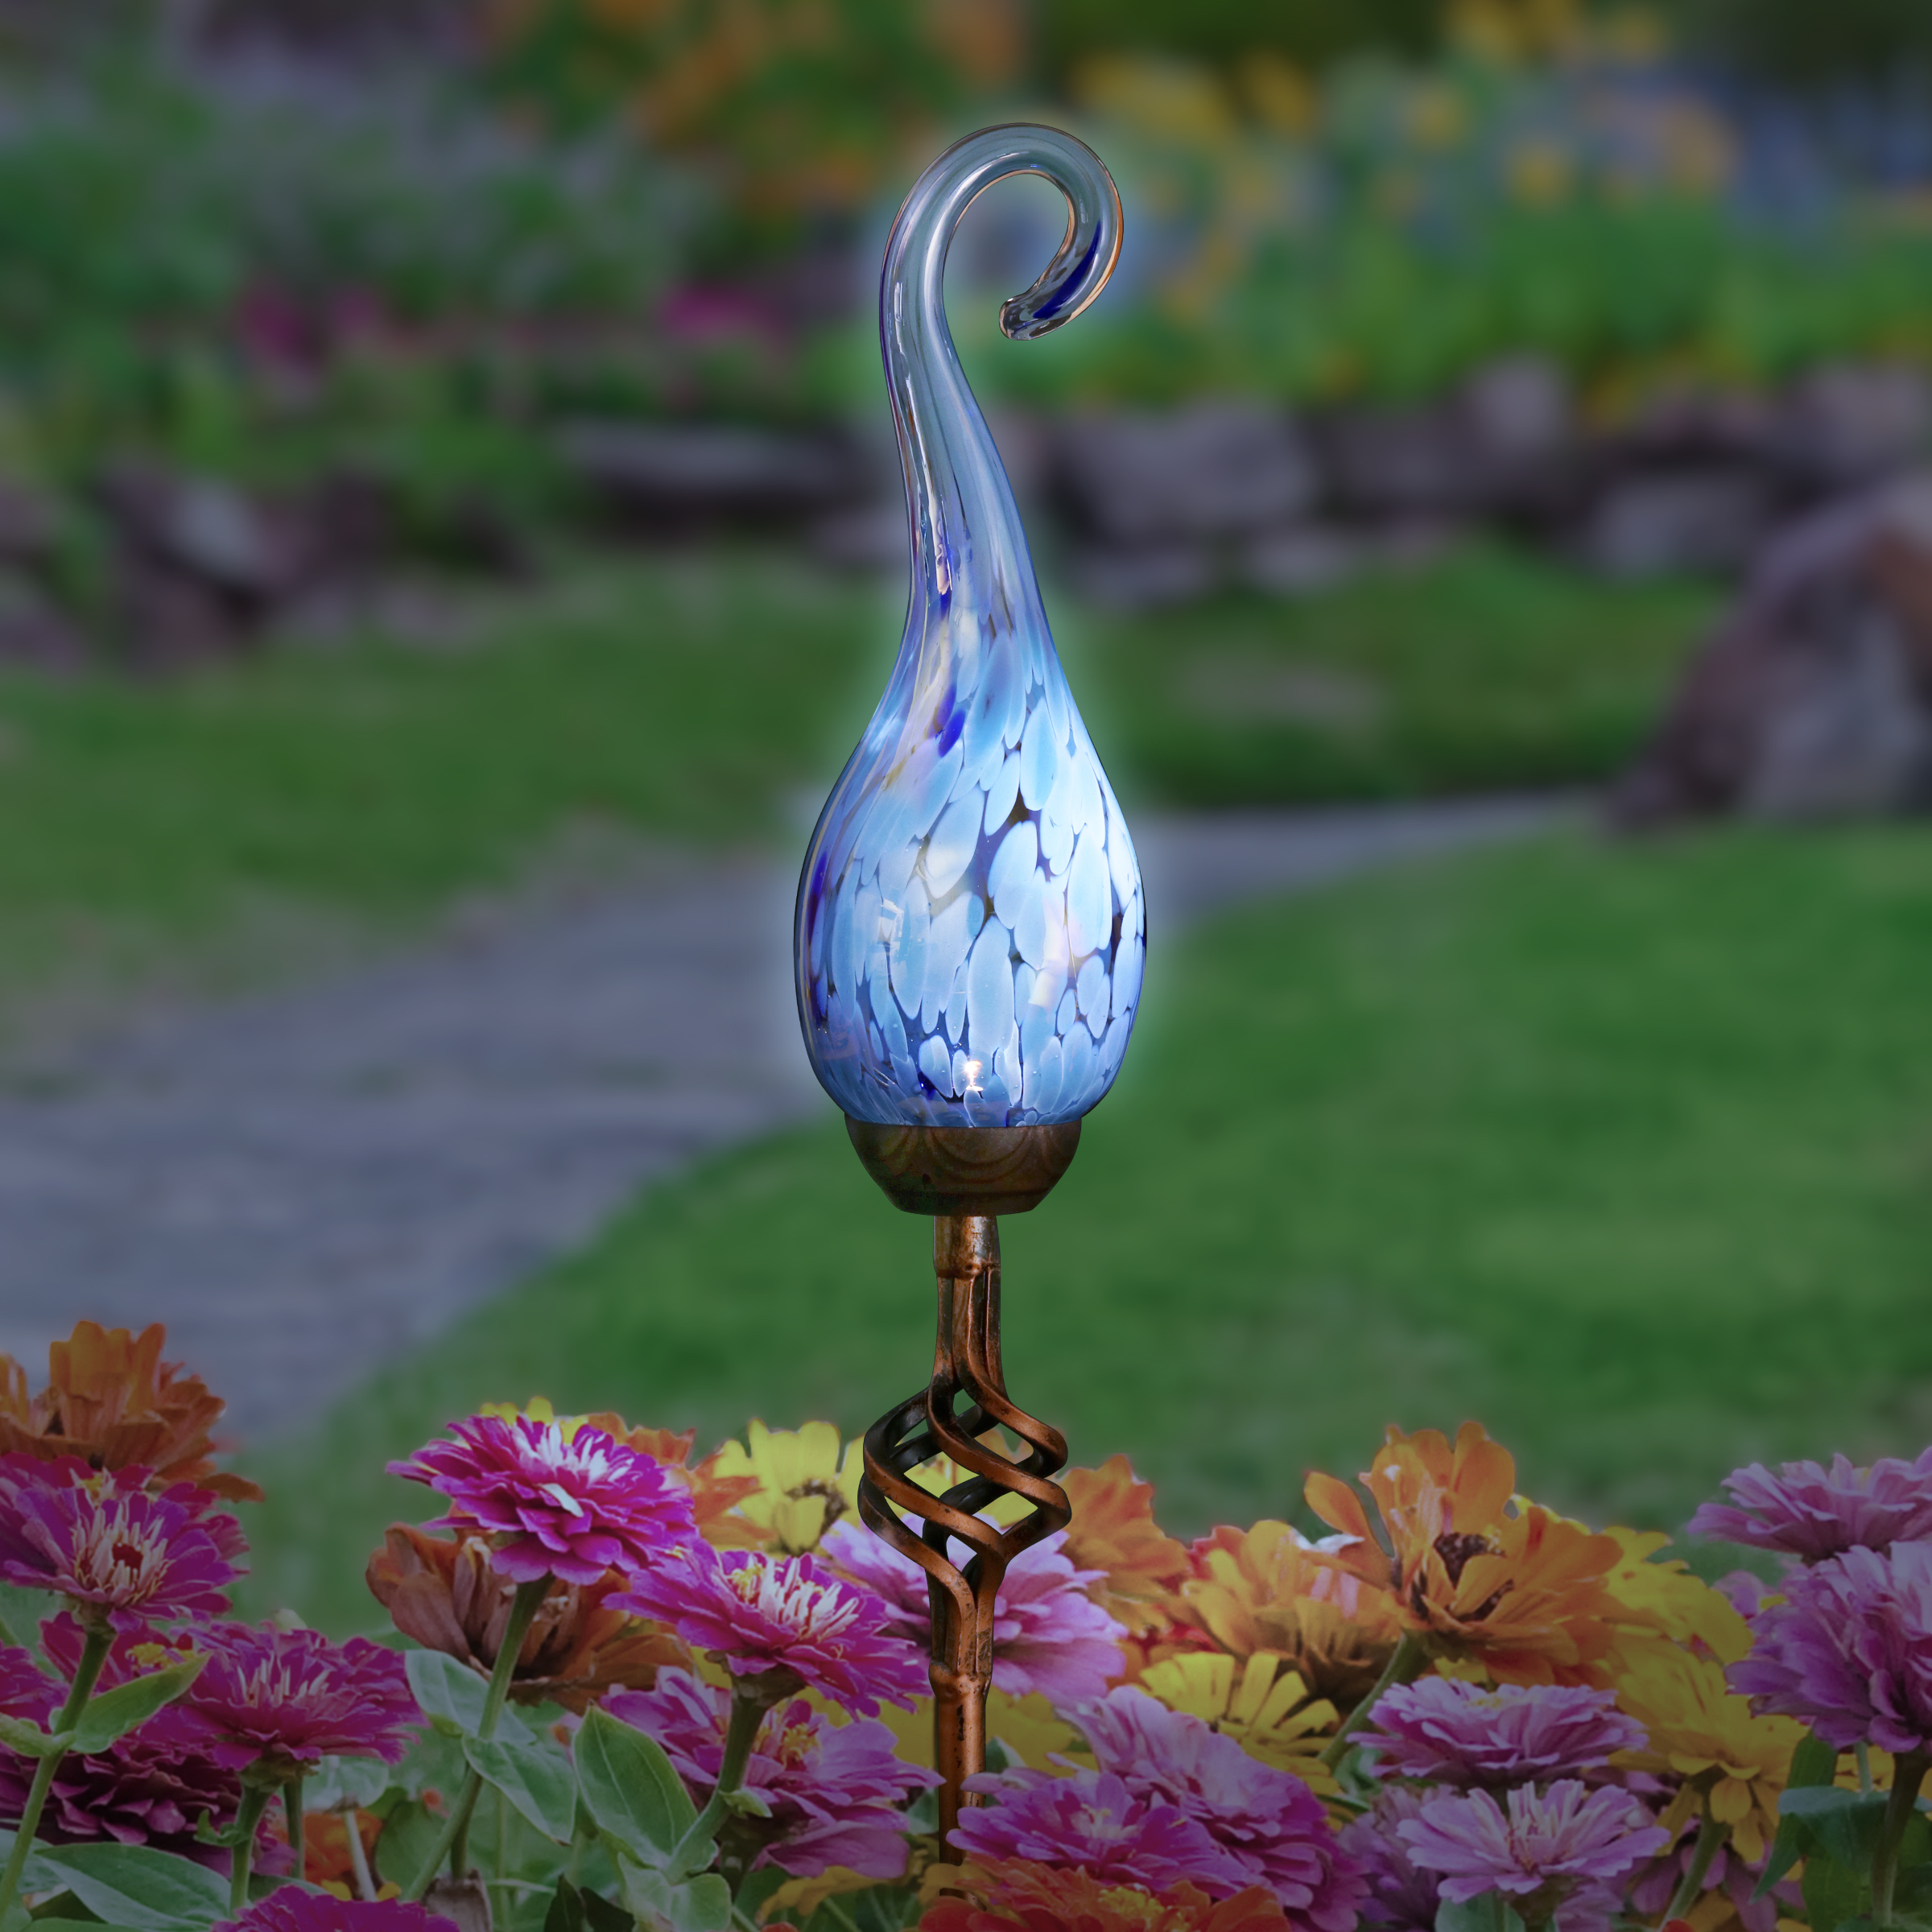 Exhart Light Blue Glass Spiral Flame  Solar Powered Garden Stake, 36 inch (Decor for Home Patio, Outdoor Garden, Yard or Lawn), Metal, Teal - image 3 of 7